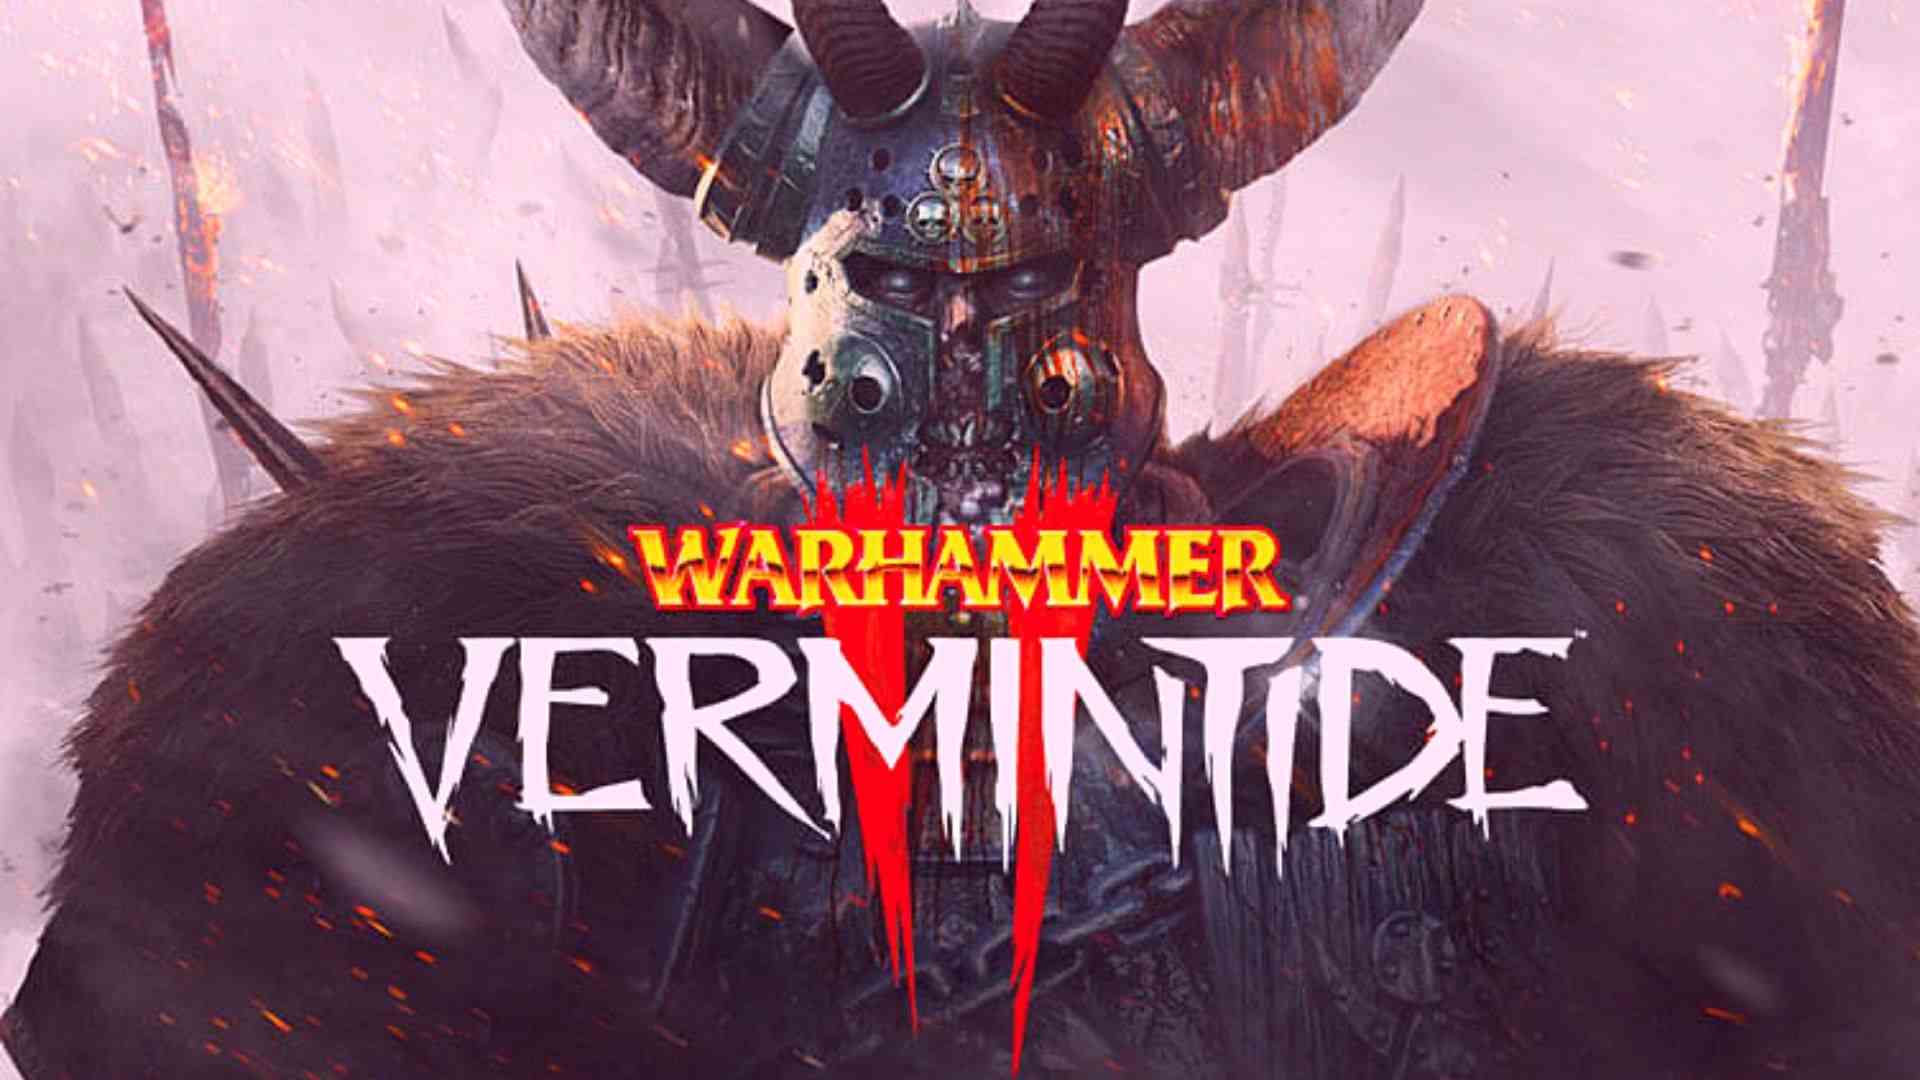 Warhammer: Vermintide 2 Age Rating and Parents Guide